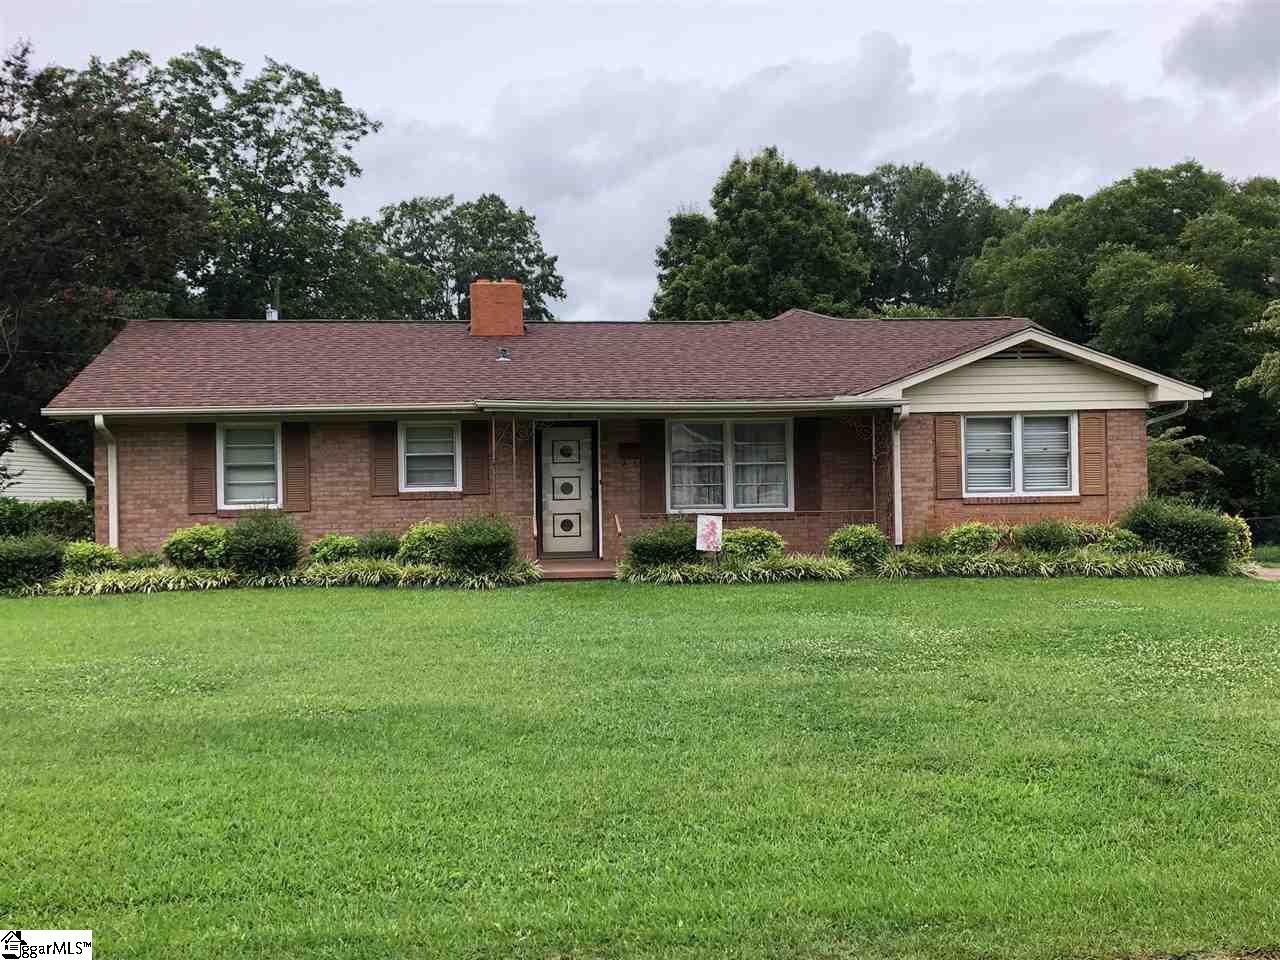 Brick/Vinyl Ranch, Crawl Space, Architectural Roof, Vinyl/Alum Trim, Some Storm Windows, Doors, Front Porch, 2 Car Carport, Detached 2 Car Garage, Paved Driveway, 3 BR, 1.5 BT, LR, DN, Den, KIT, Laminate Counter Tops, Smooth Cook Top, Electric Oven, Dishwasher, Laundry, Dryer Gas Hookup, Gas Water Heater, MB, Sunroom - Natural Gas Heat, Forced Air, AC, Electric, Central Forced, Floors, Hardwood, Ceramic Tile, Carpet, Public Water, Sewer